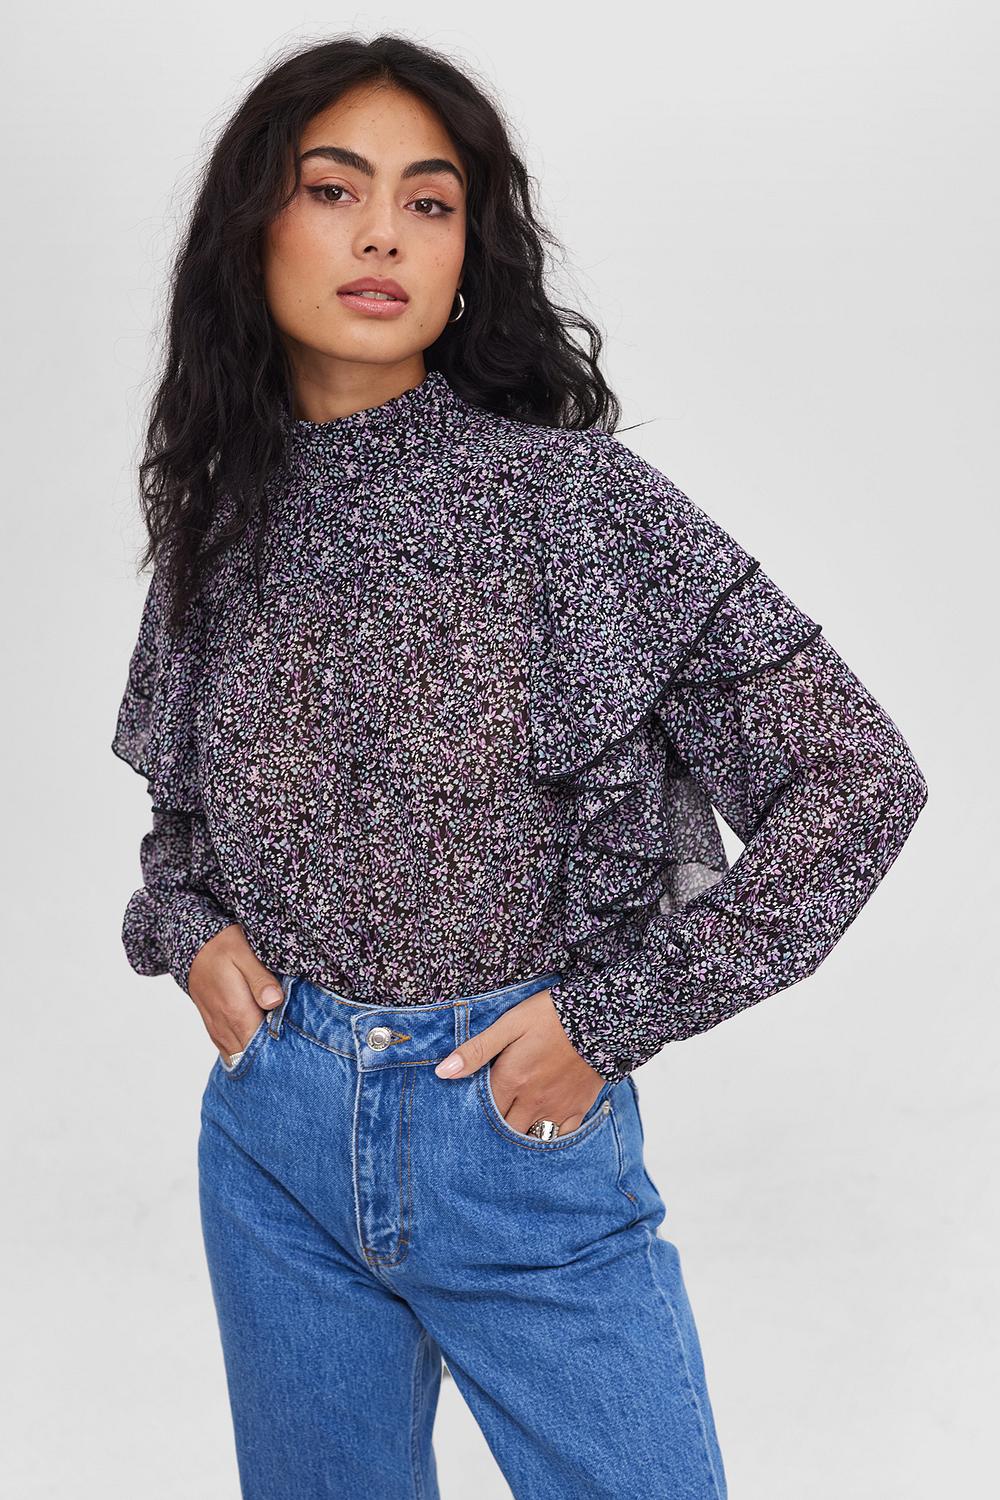 Purple blouse with floral print